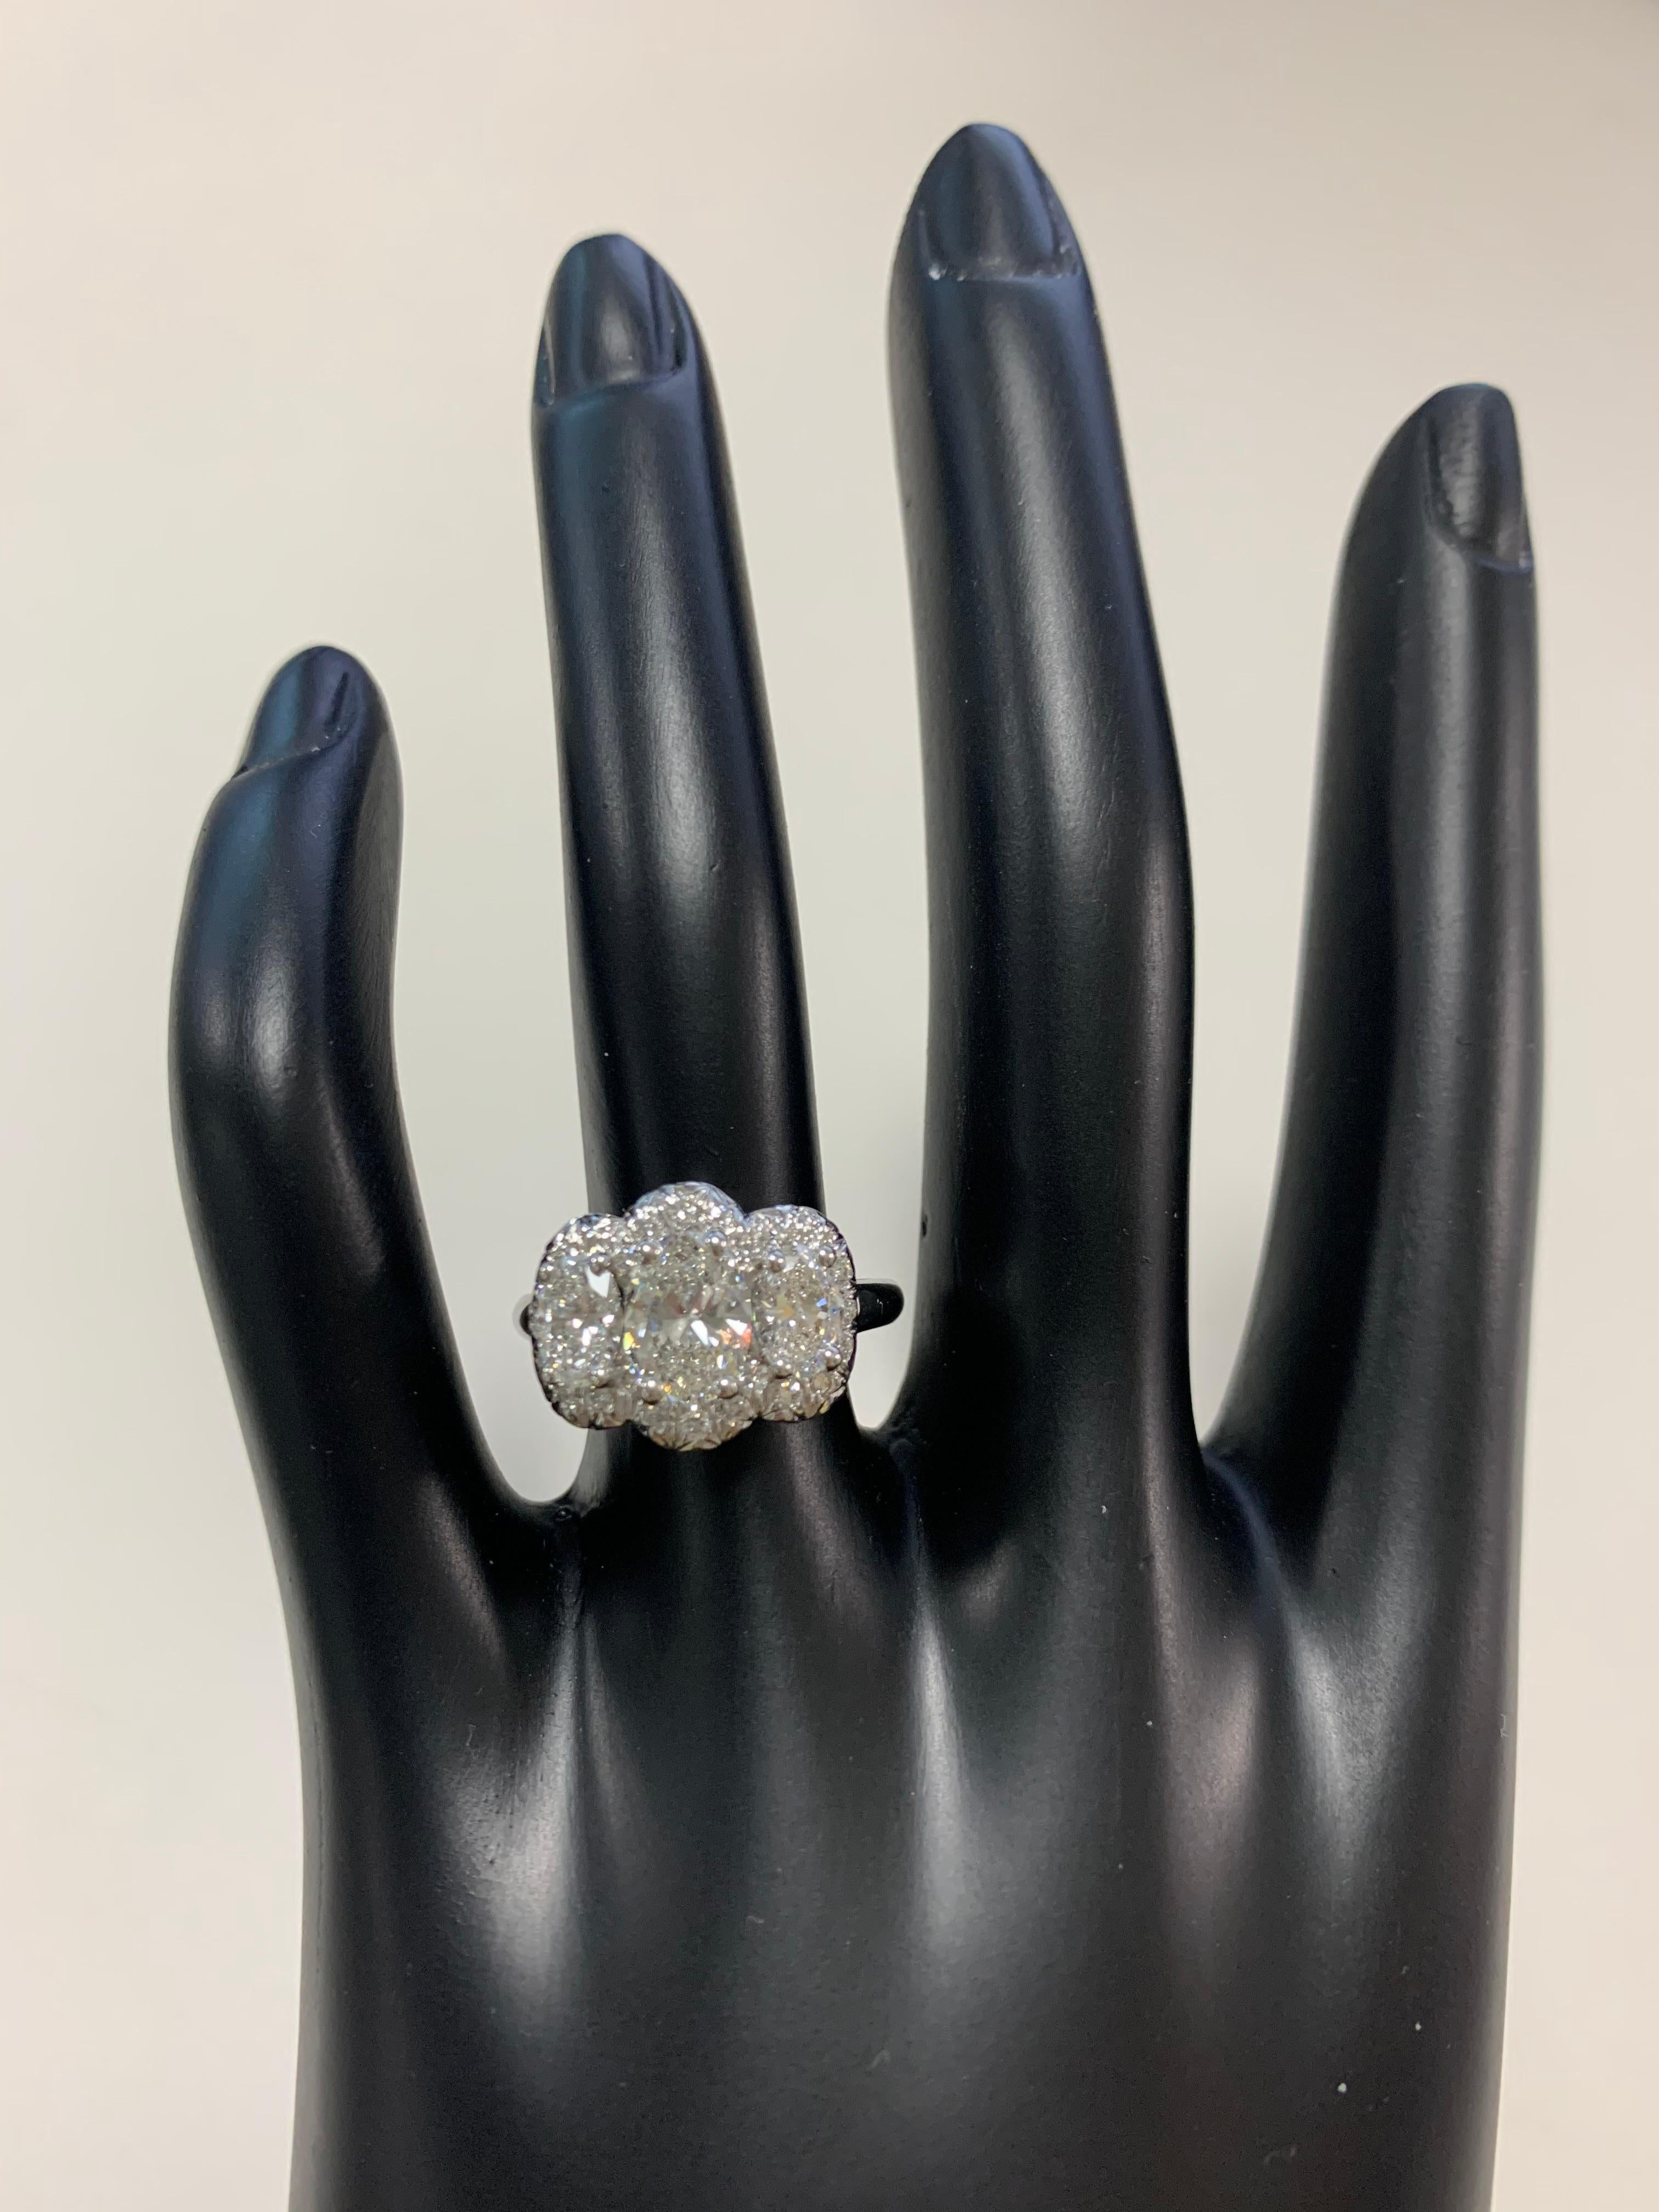 Oscar Heyman platinum oval diamond three stone engagement ring with pave halo contains a 1.20ct center stone (F/VS1) and two side stones 1.02tcw (E/VS1), all with GIA reports.  The pave halo contains 24 round diamonds (0.36tcw). The total width of